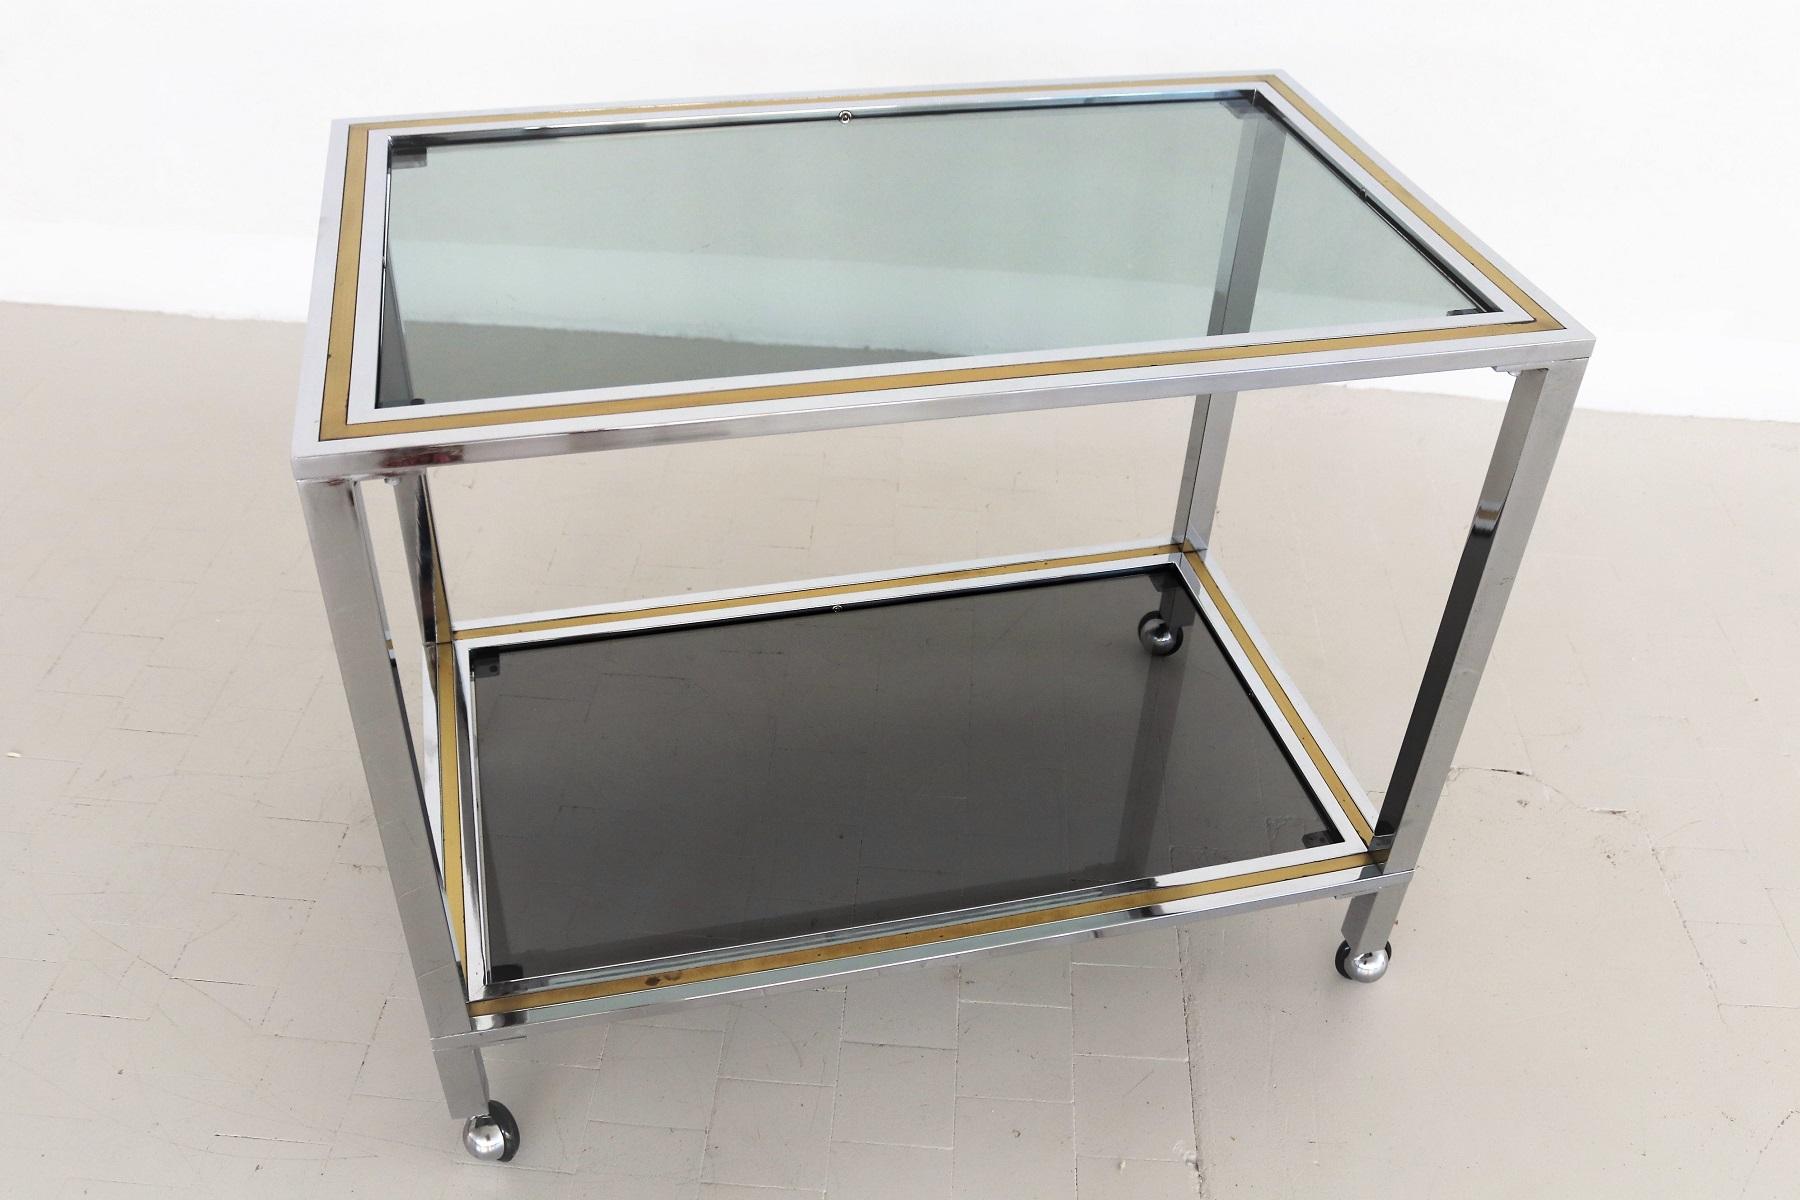 Italian Midcentury Bar Cart or Trolley in Brass and Chrome, 1970s For Sale 5